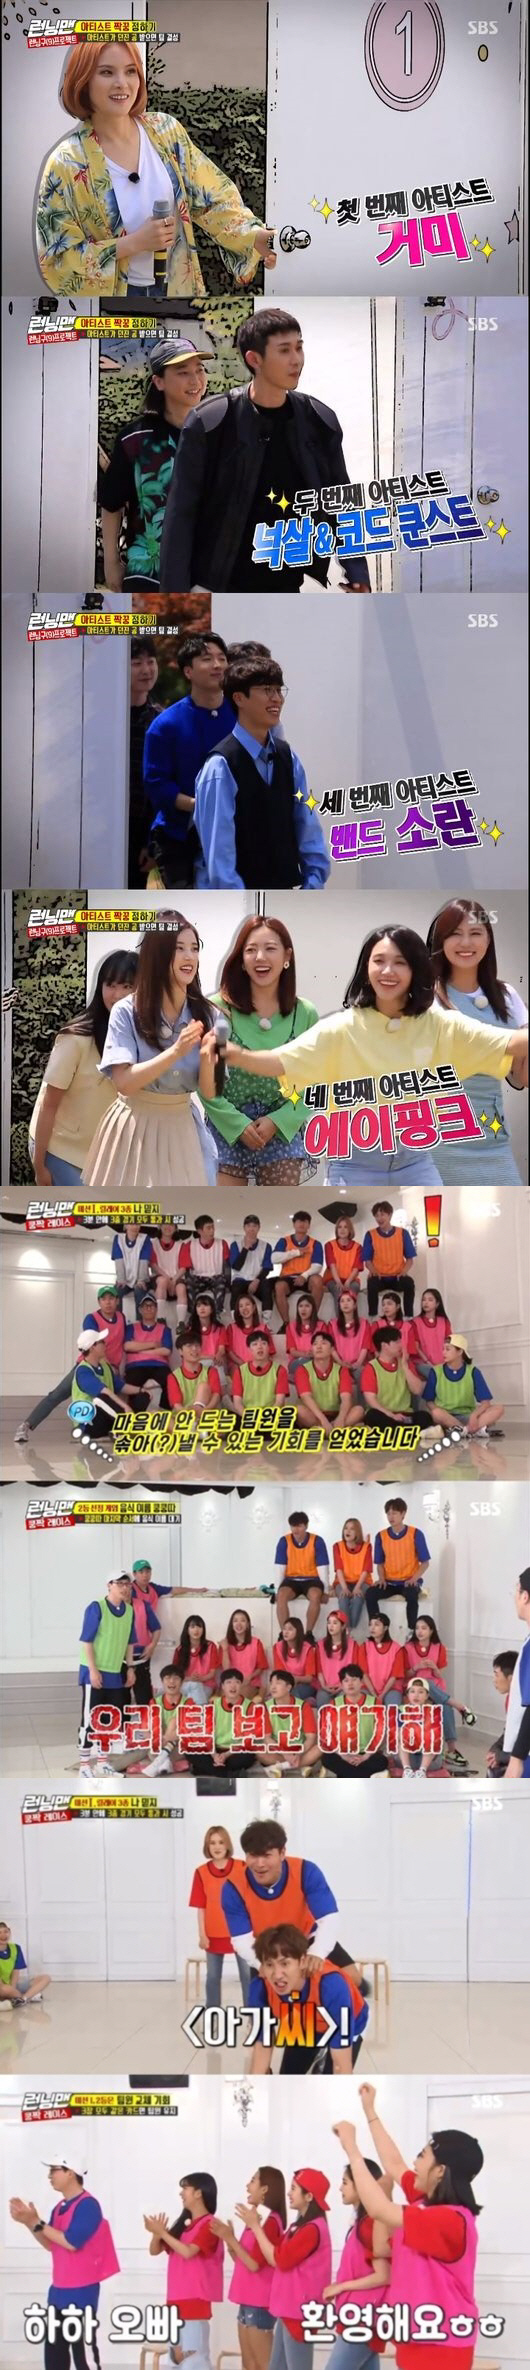 SBS Running Man has released the collaborator The Artists to hold a 9th anniversary fan meeting, and kept the top spot in the same time zone of 2049 target audience rating.According to Nielsen Korea, the ratings agency Running Man, which was broadcast on the 7th, soared to 8.7% of the highest audience rating per minute, and 2049 target audience rating, which is an important indicator of major advertising officials, recorded 4% (based on the second part of the audience rating of Seoul Capital Area households), topping the Masked Wang and The average audience rating was 4.9% in the first part and 6.7% in the second part (based on the audience rating of the Seoul Capital Area household).The broadcast was made up of the Running Zone Project and the top four artists who will hold a 9th Anniversary Korean Fan Meeting with the members were released.The Artist 1 team and two members had to pair up, and the OST Queen spider first appeared, paired with Kim Jong-kook and Lee Kwang-soo.Nunsal & Cod Kunst was in close contact with Song Ji-hyo X Haha, and the band disturbance was paired with Yoo Jae-Suk X Jeon So-min and girl group Apink with Ji Suk-jin X Yang Se-chan.Especially, Nuksal and Song Ji-hyo made a bigger smile as it became a topic of resemblance.The first pair was set, and it was decorated with a kung-pak race which is a total of three rounds.The final team was able to stand on stage as a collaboration team, and all teams played a confrontation without concessions.In the first showdown, the spider X Kim Jong-kook X Lee Kwang-soo team took first place and did not change the team member, but the second-ranked Apink X Ji Suk-jin X Yang Se-chan team did not agree.Eventually, Yoo Jae-Suk X Haha was paired with Apink and the scene won the best minute with a top audience rating of 8.7%.